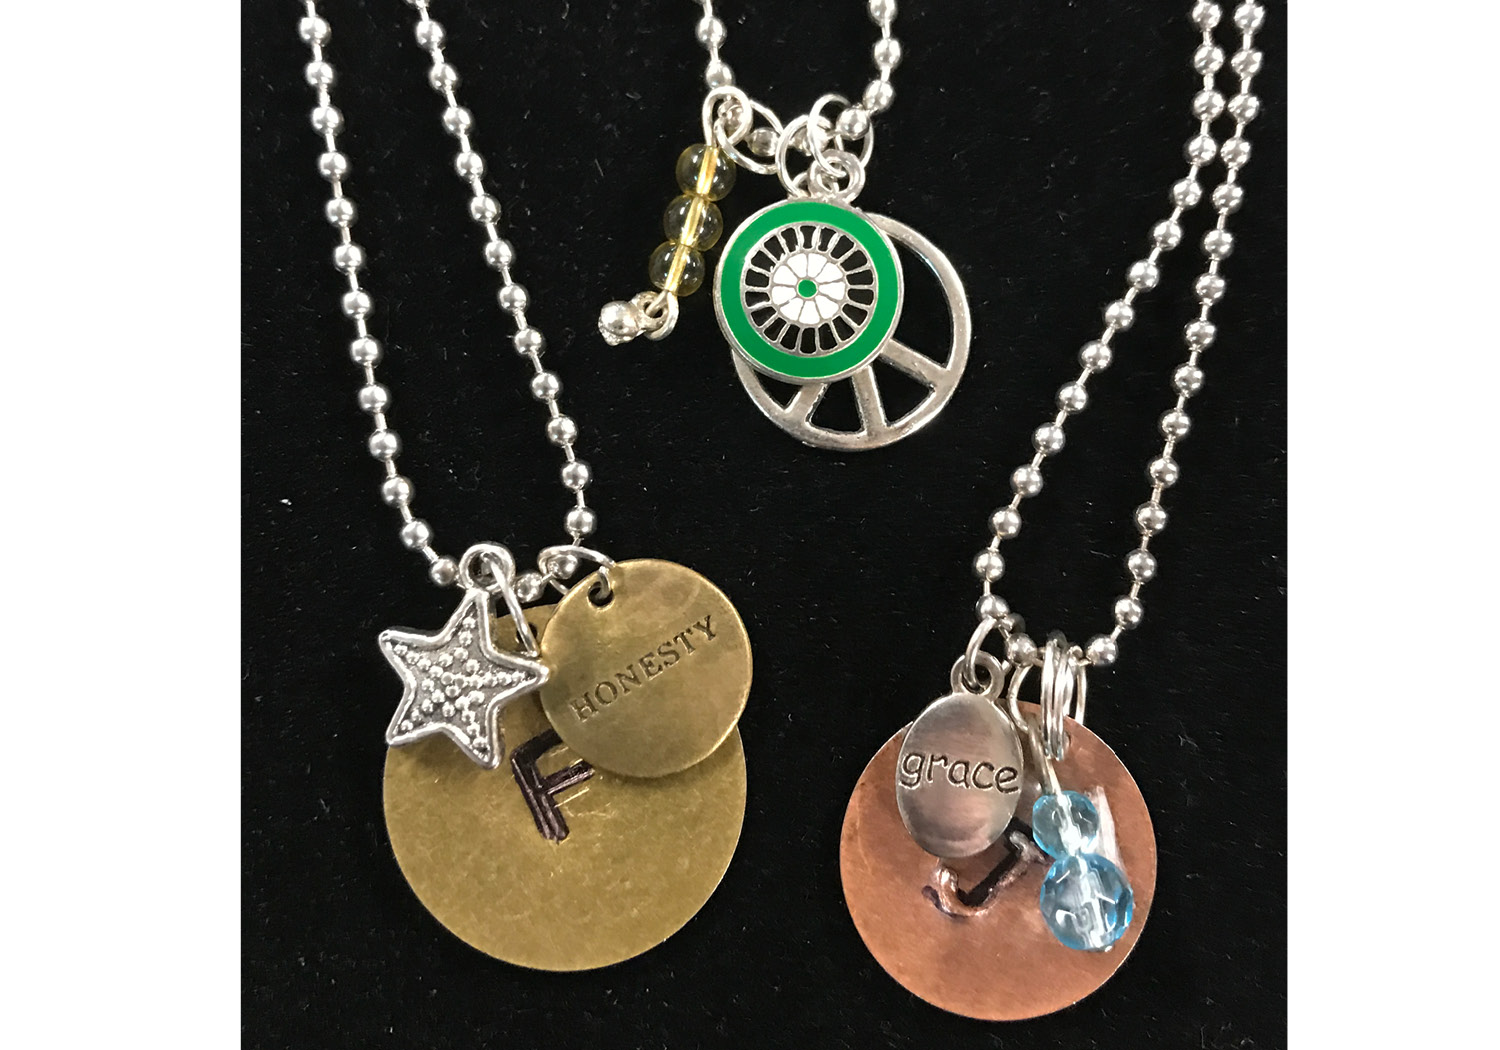 Customize your charm with your initial!